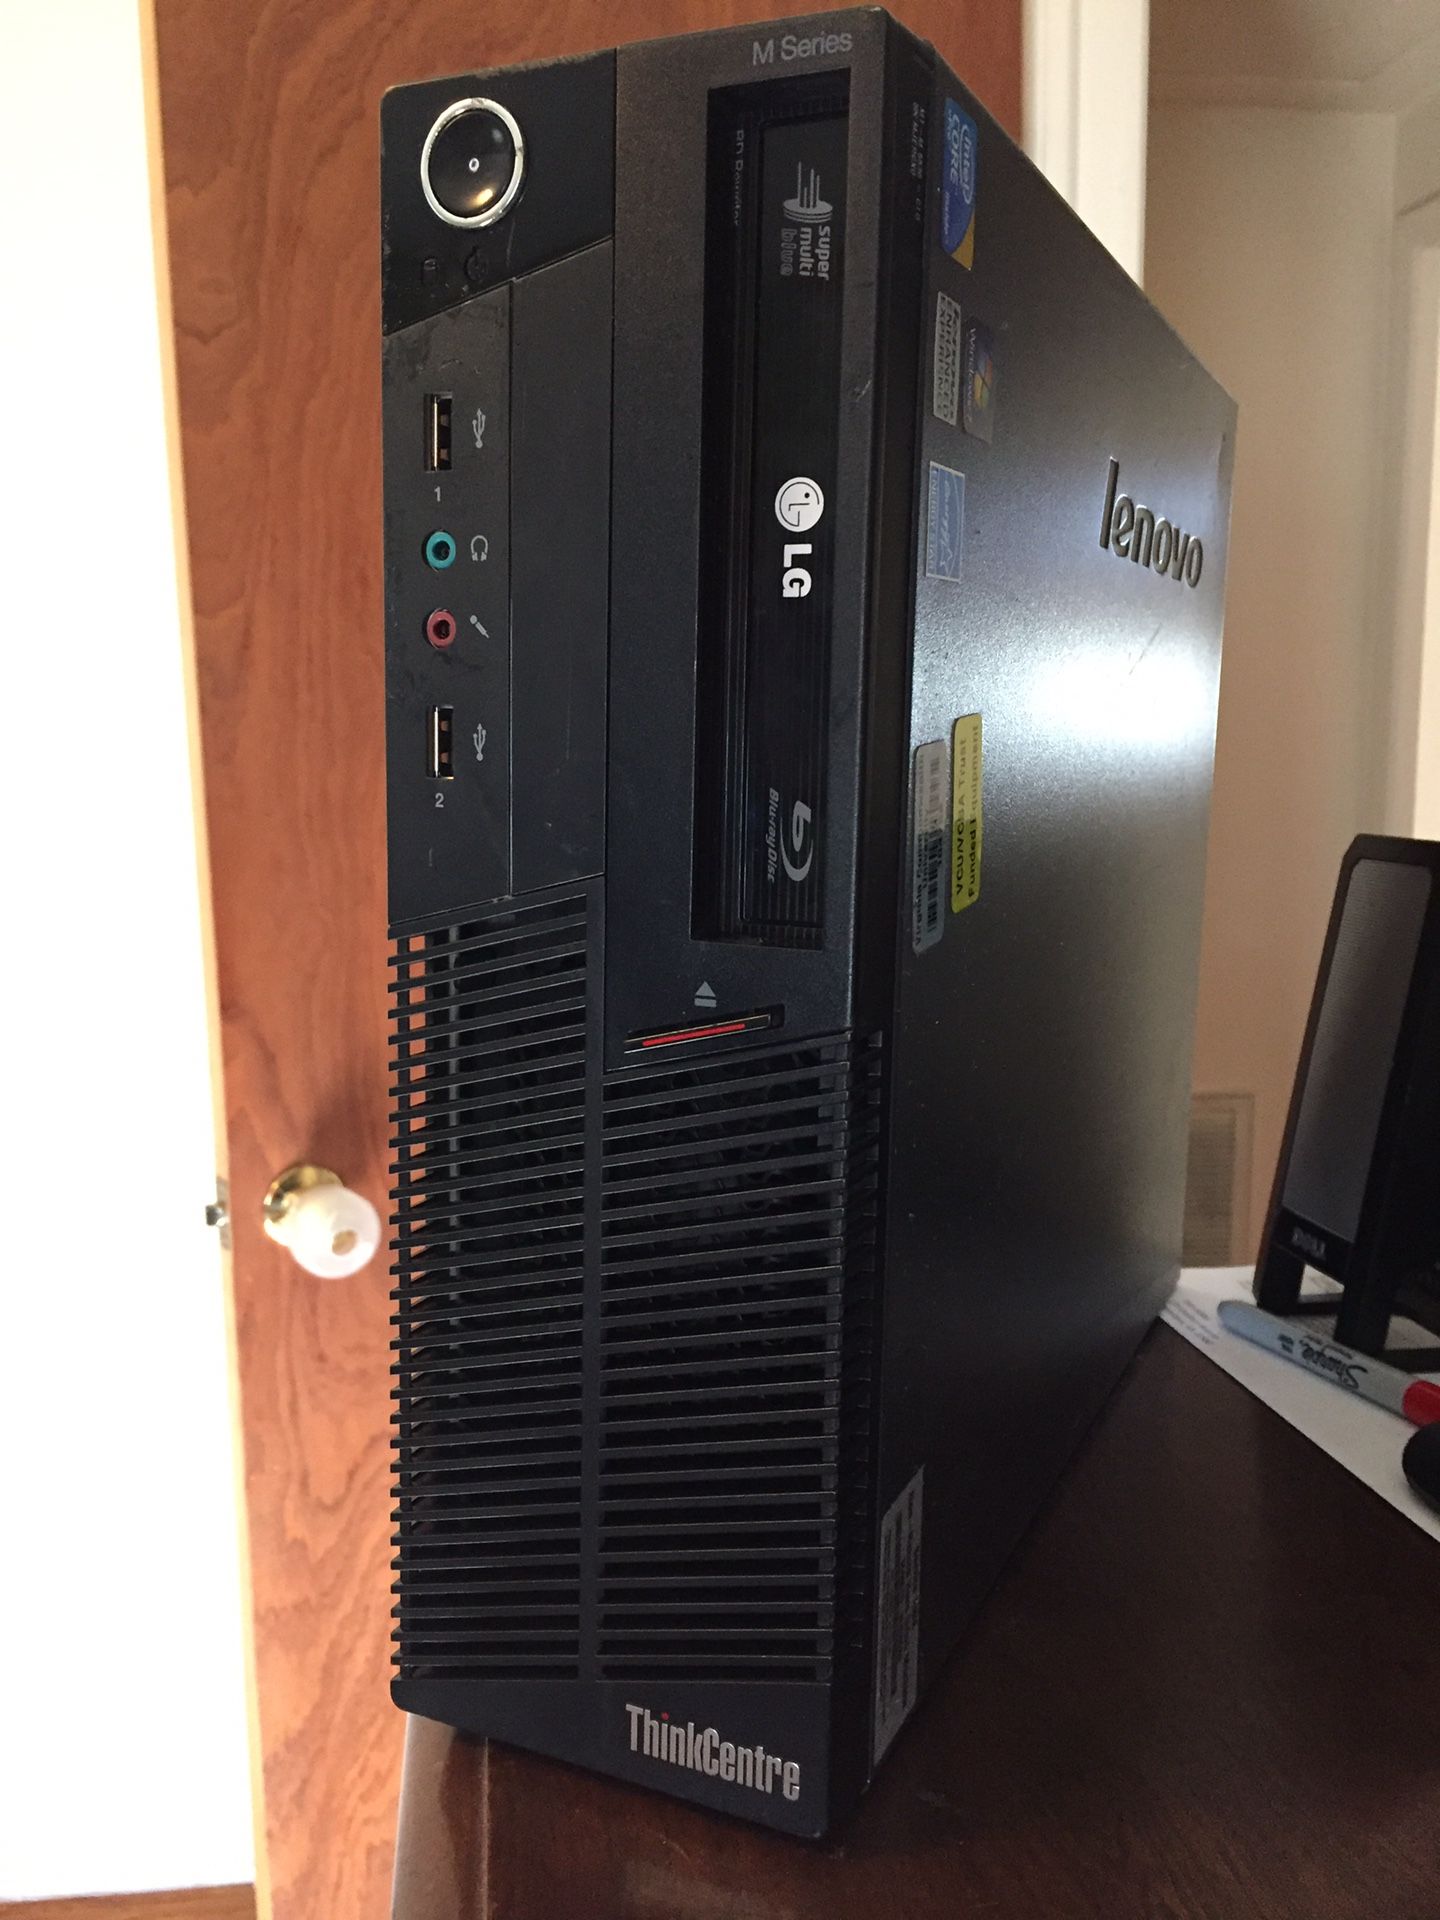 Lenovo ThinkCentre M Series SFF w/ monitor, keyboard and mouse